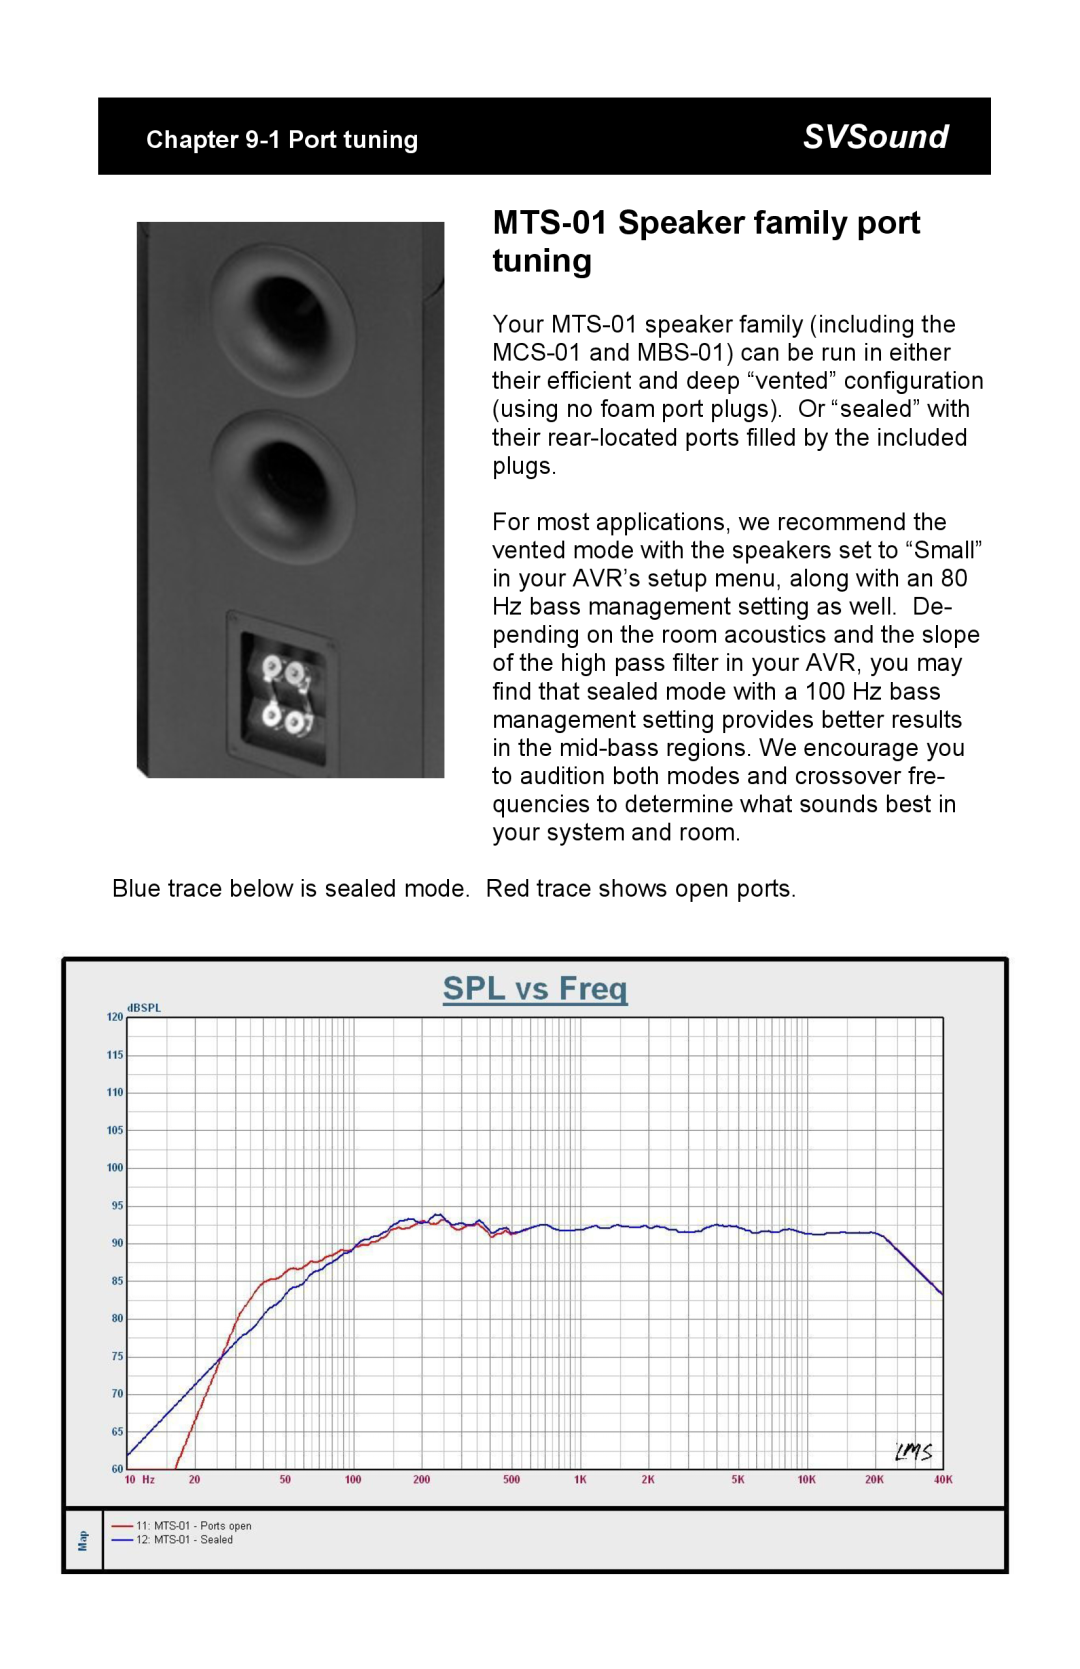 SV Sound SCS-01, SBS-01 specifications MTS-01Speaker family port tuning, SVSound, 1Port tuning 